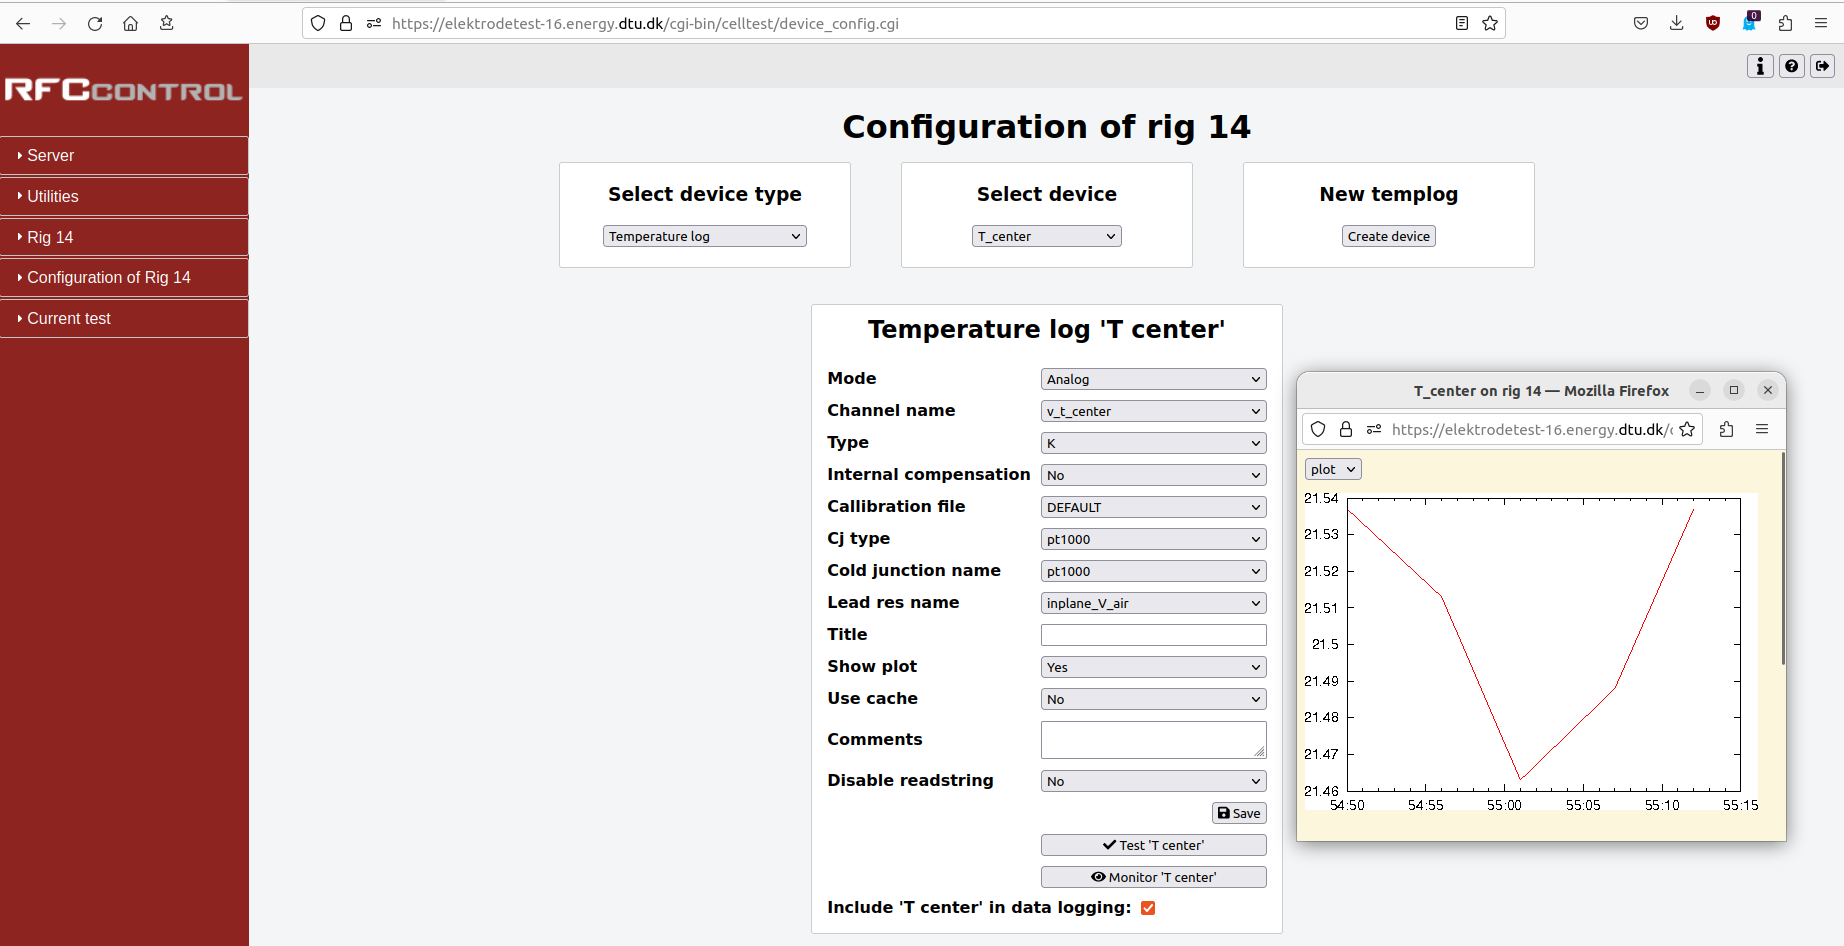 Screenshot of configuration of a rig controlled by RFCcontrol